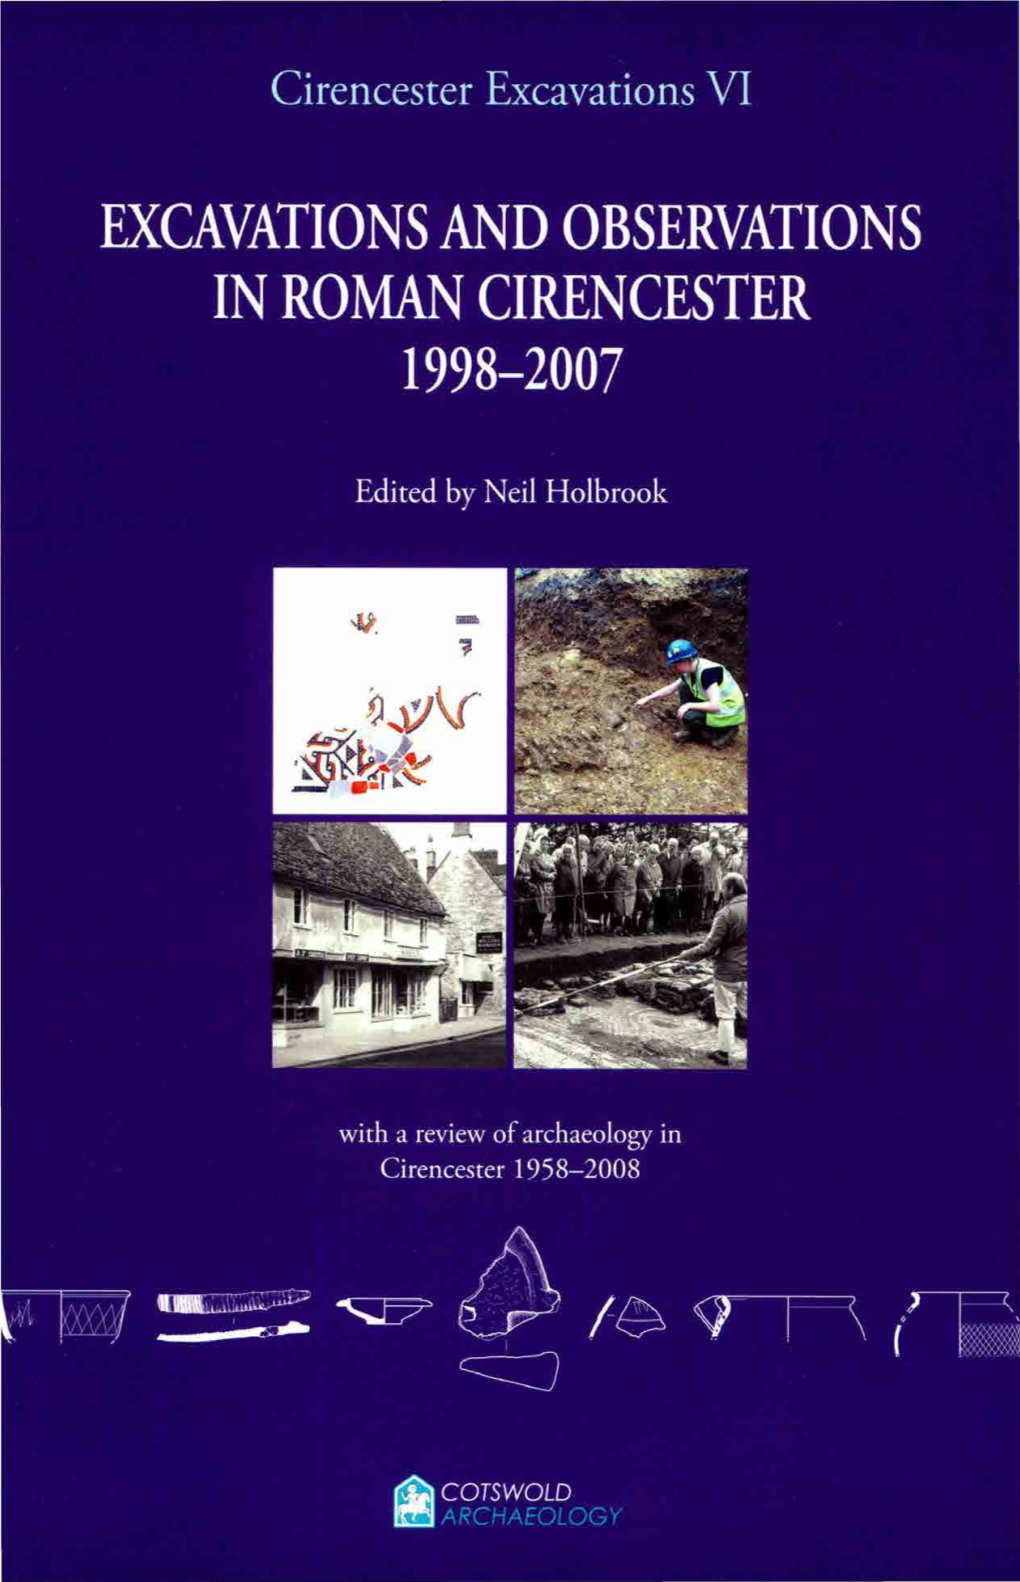 Excavations and Observations in Roman Cirencester 1998-2007